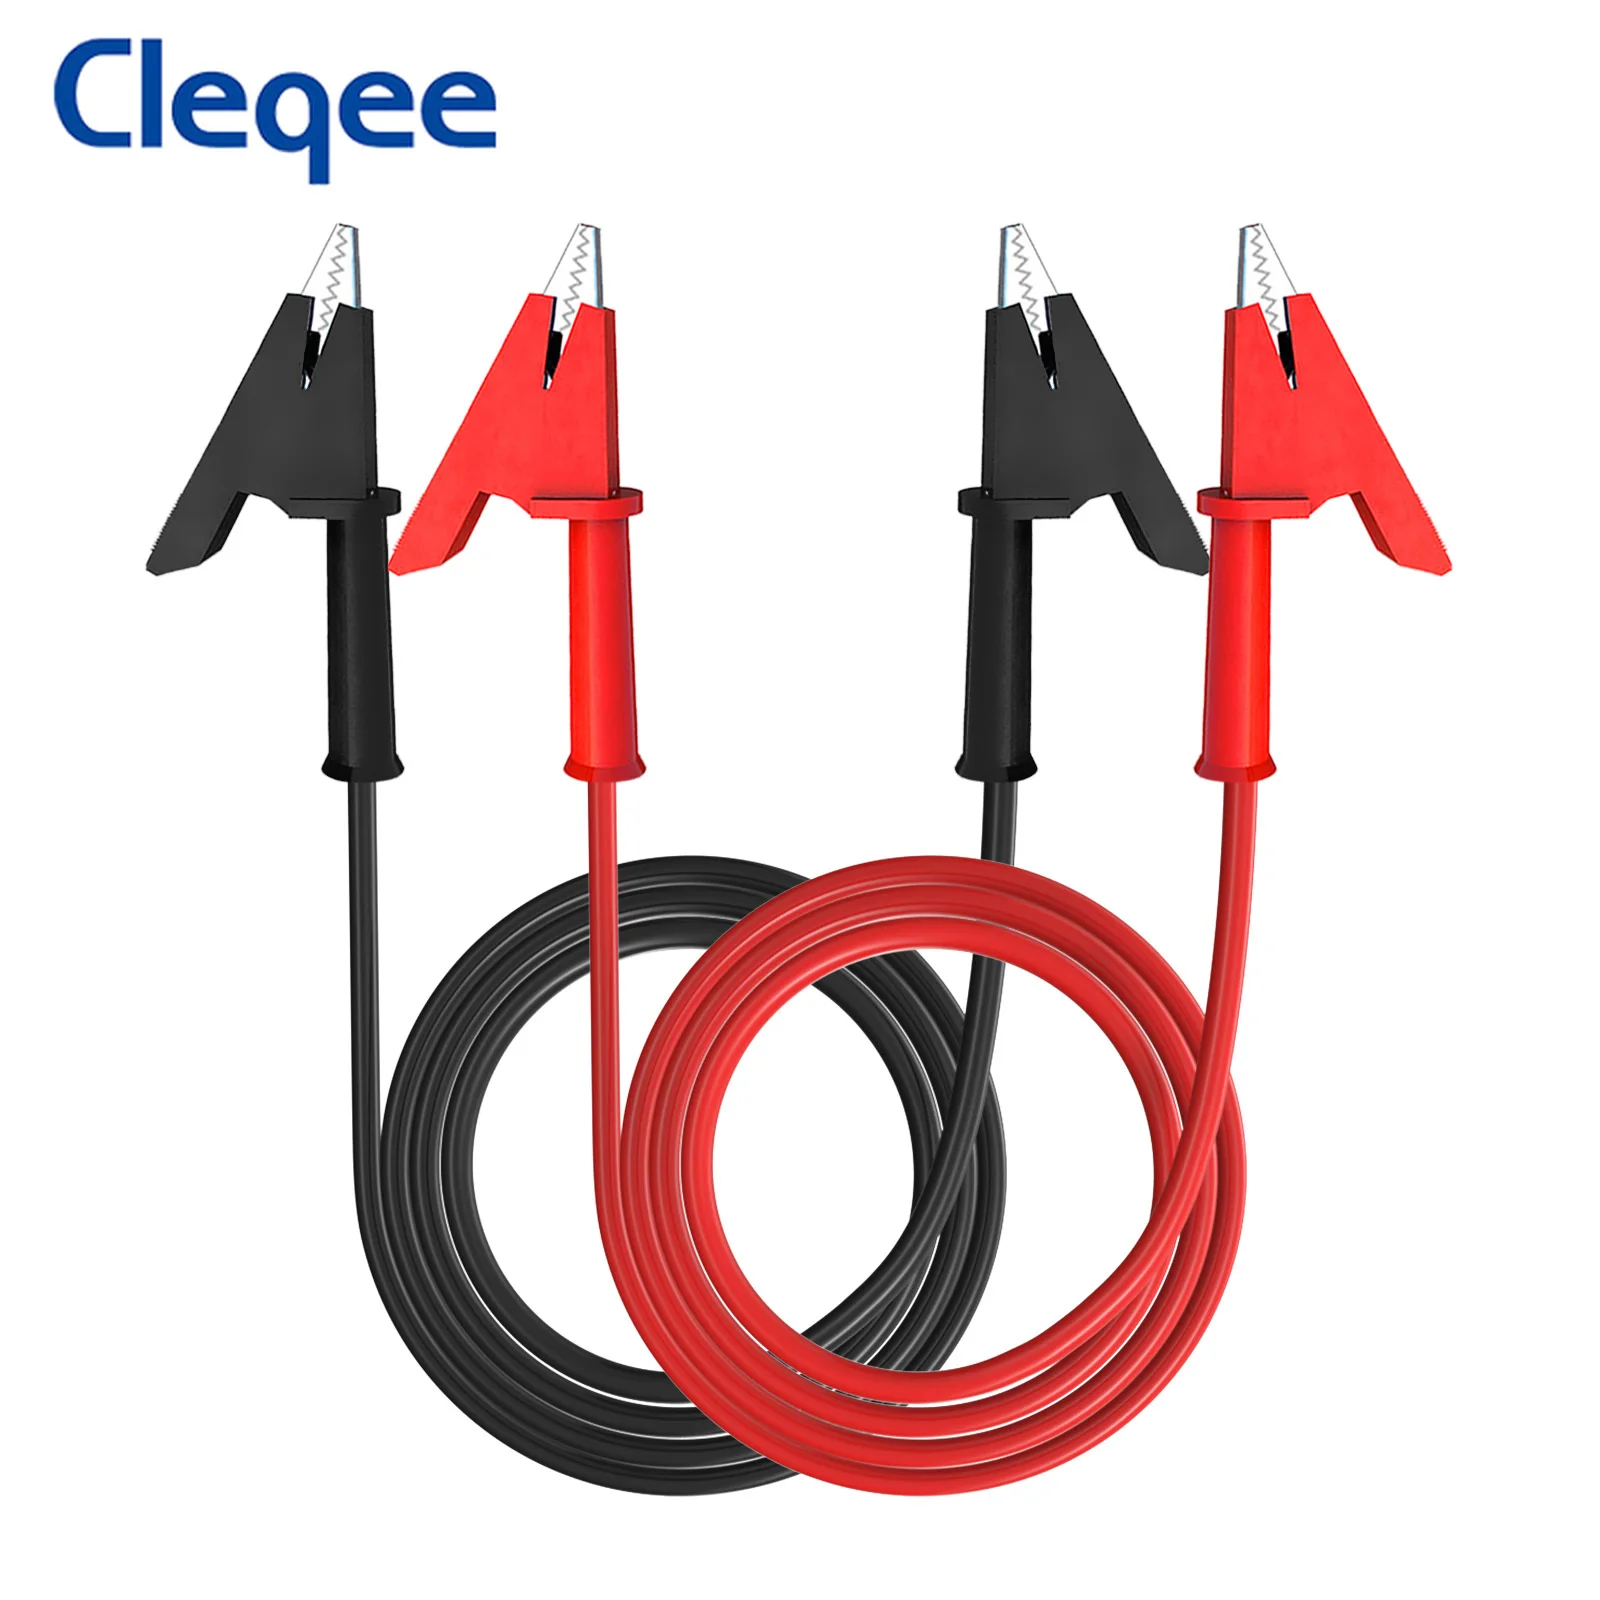 

Cleqee P1024 2PCS Dual Alligator Clips Test Leads Heavy Duty Crocodile Clamps Multimeter Test Wires 1000V 15A 100cm Cable